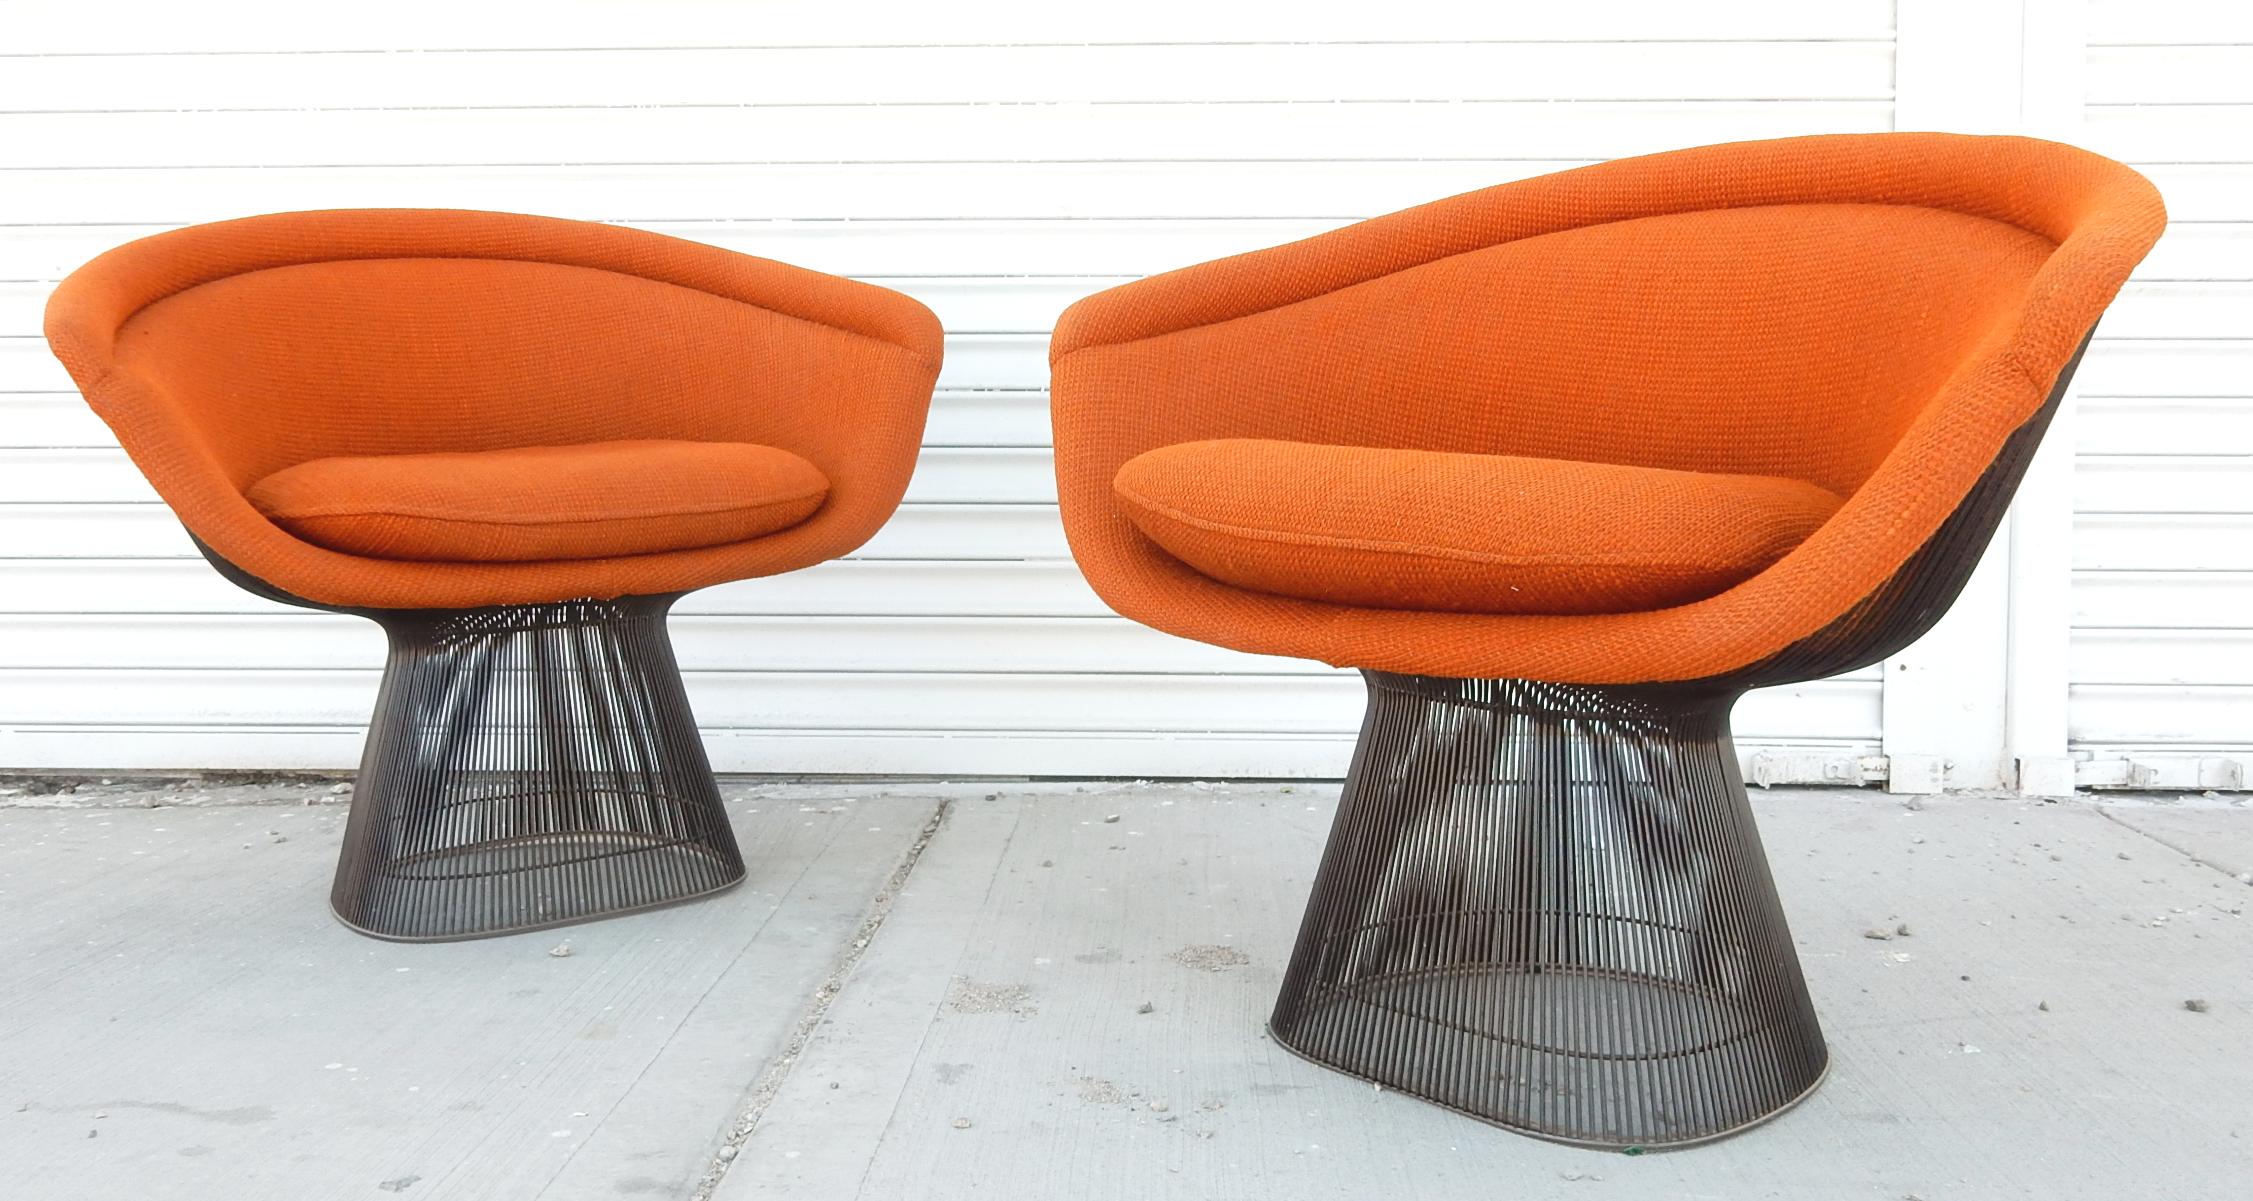 Extra extraordinary pair of the iconic wire lounge chair designed by Warren Platner for Knoll International., dated 1978.
Original Knoll orange upholstery on anodized black wire frames. Both labelled under seat cushion.
These chairs are clean and